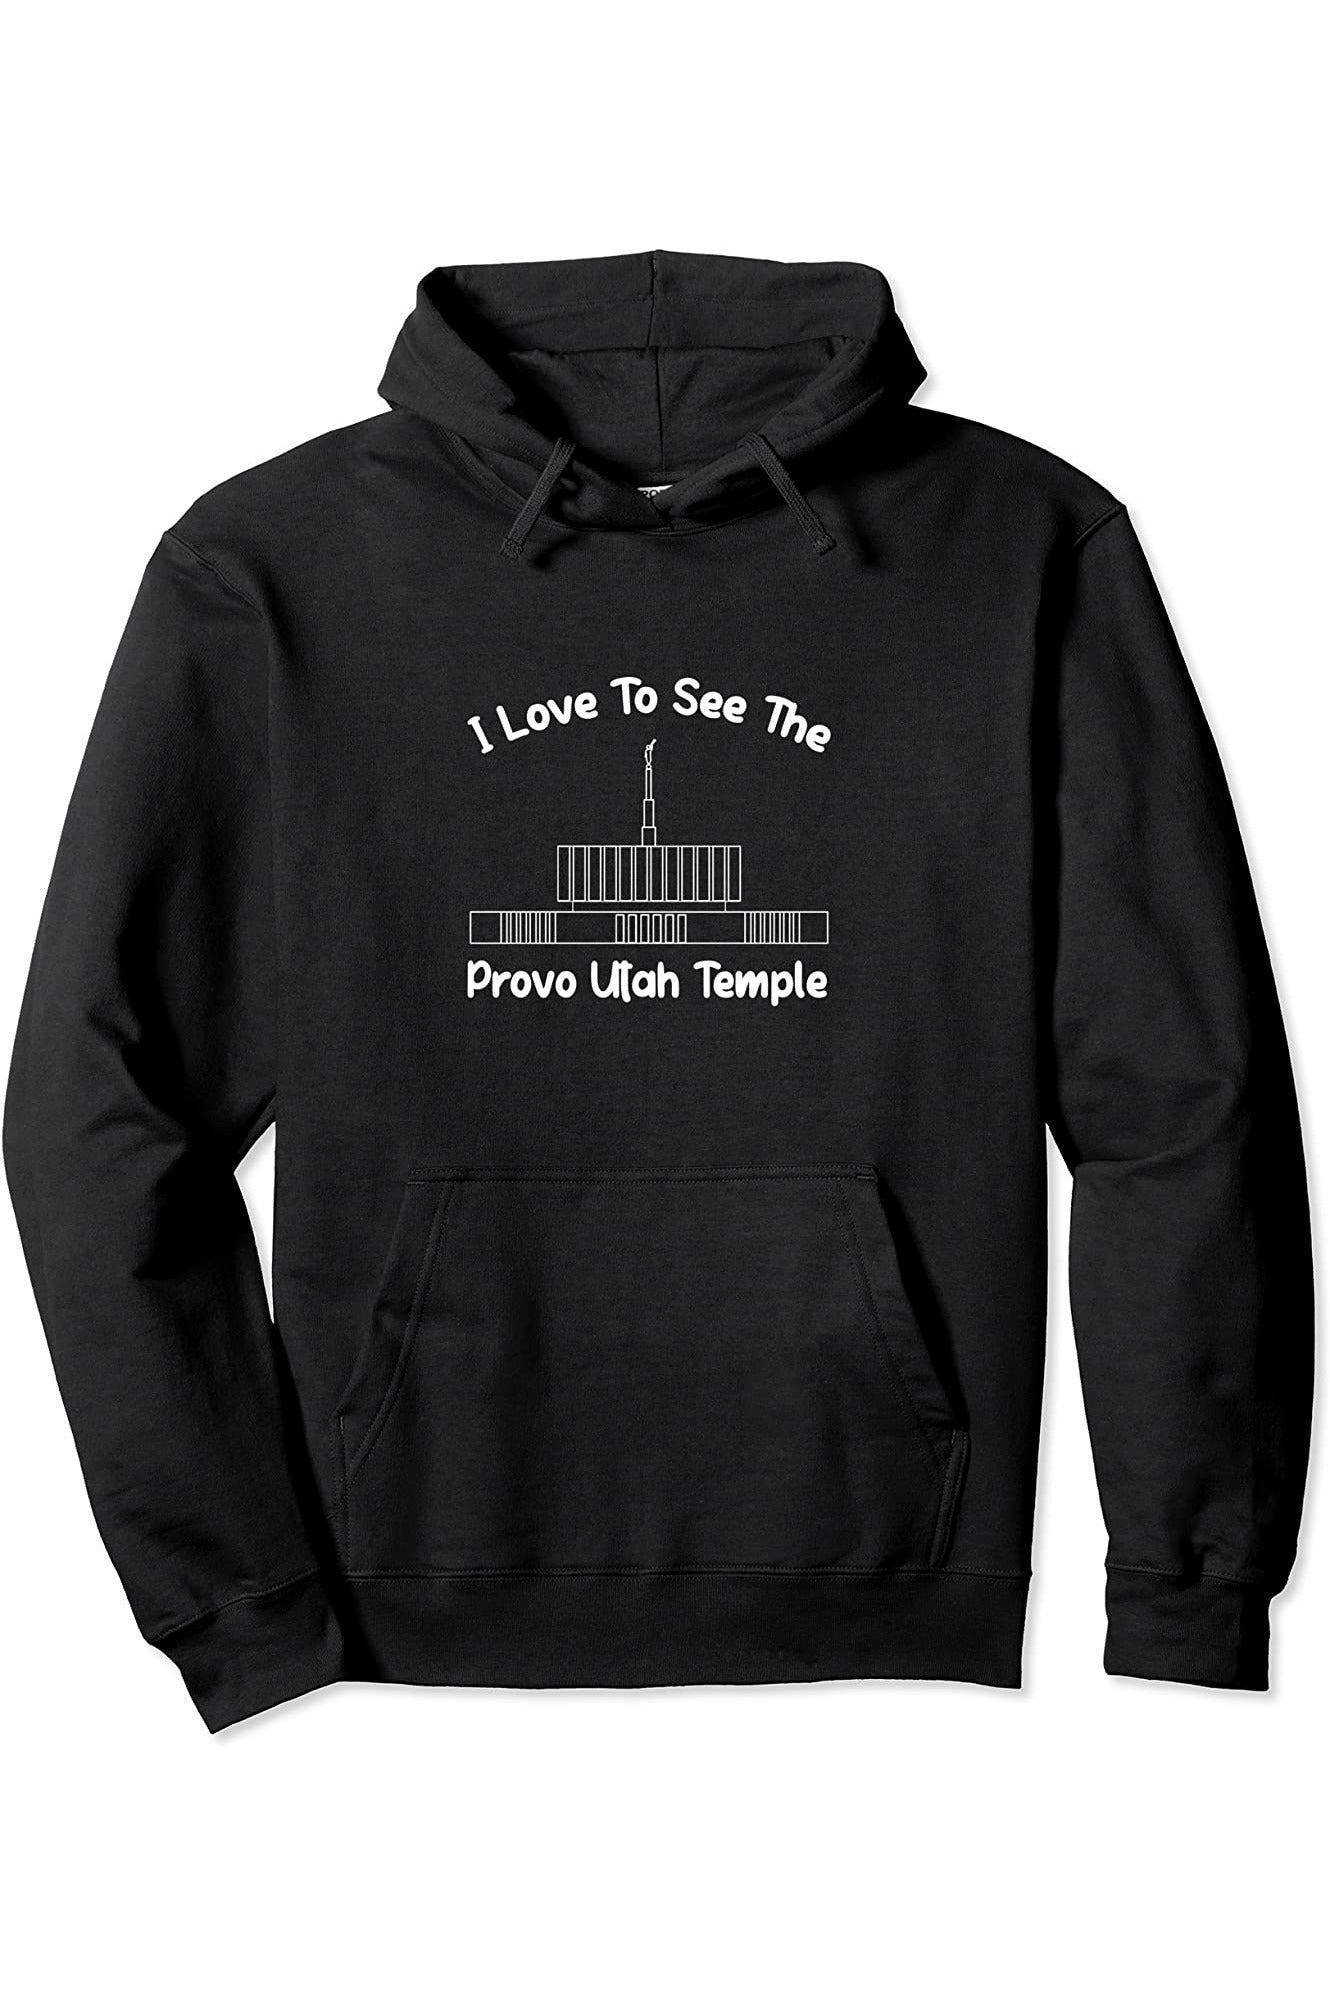 Provo Utah Temple Pullover Hoodie - Primary Style (English) US